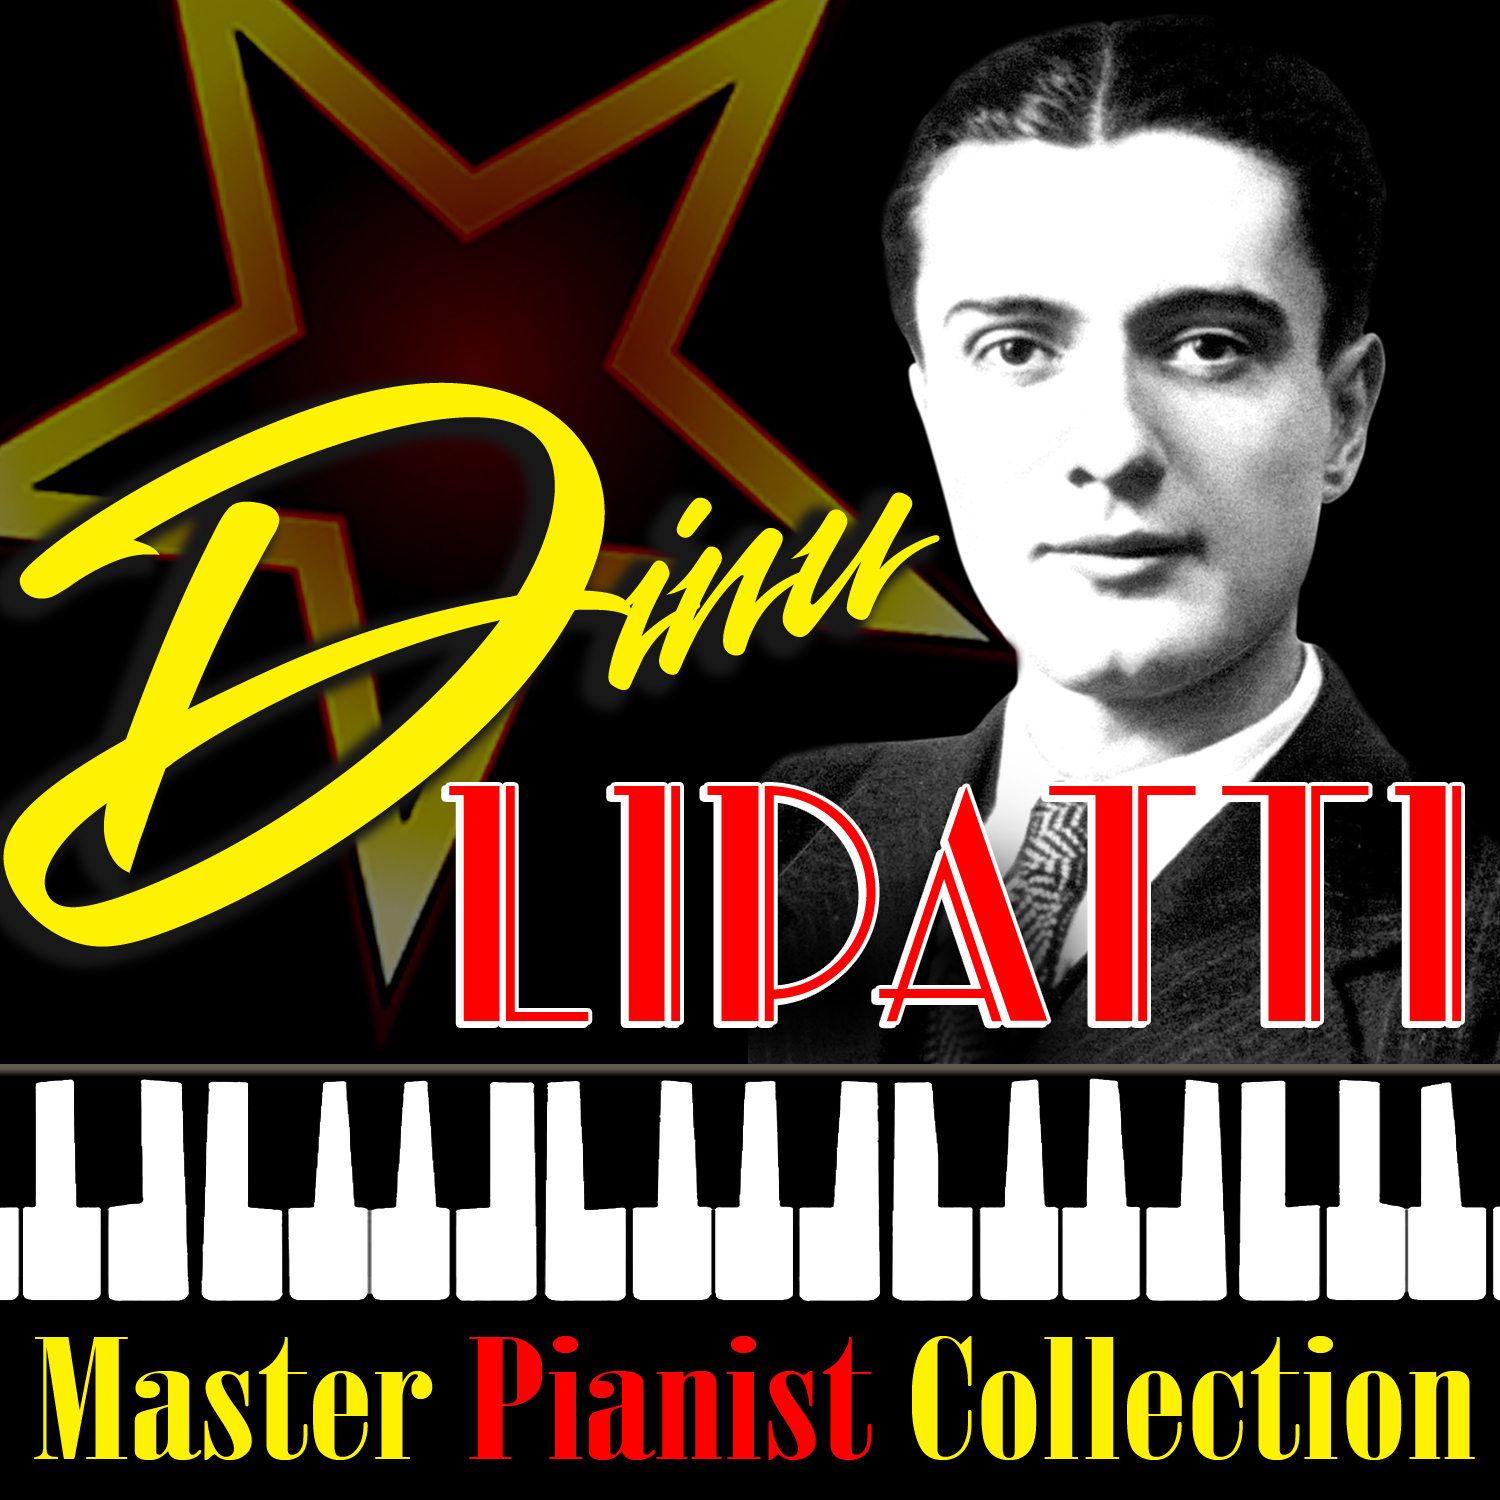 Master Pianist Collection